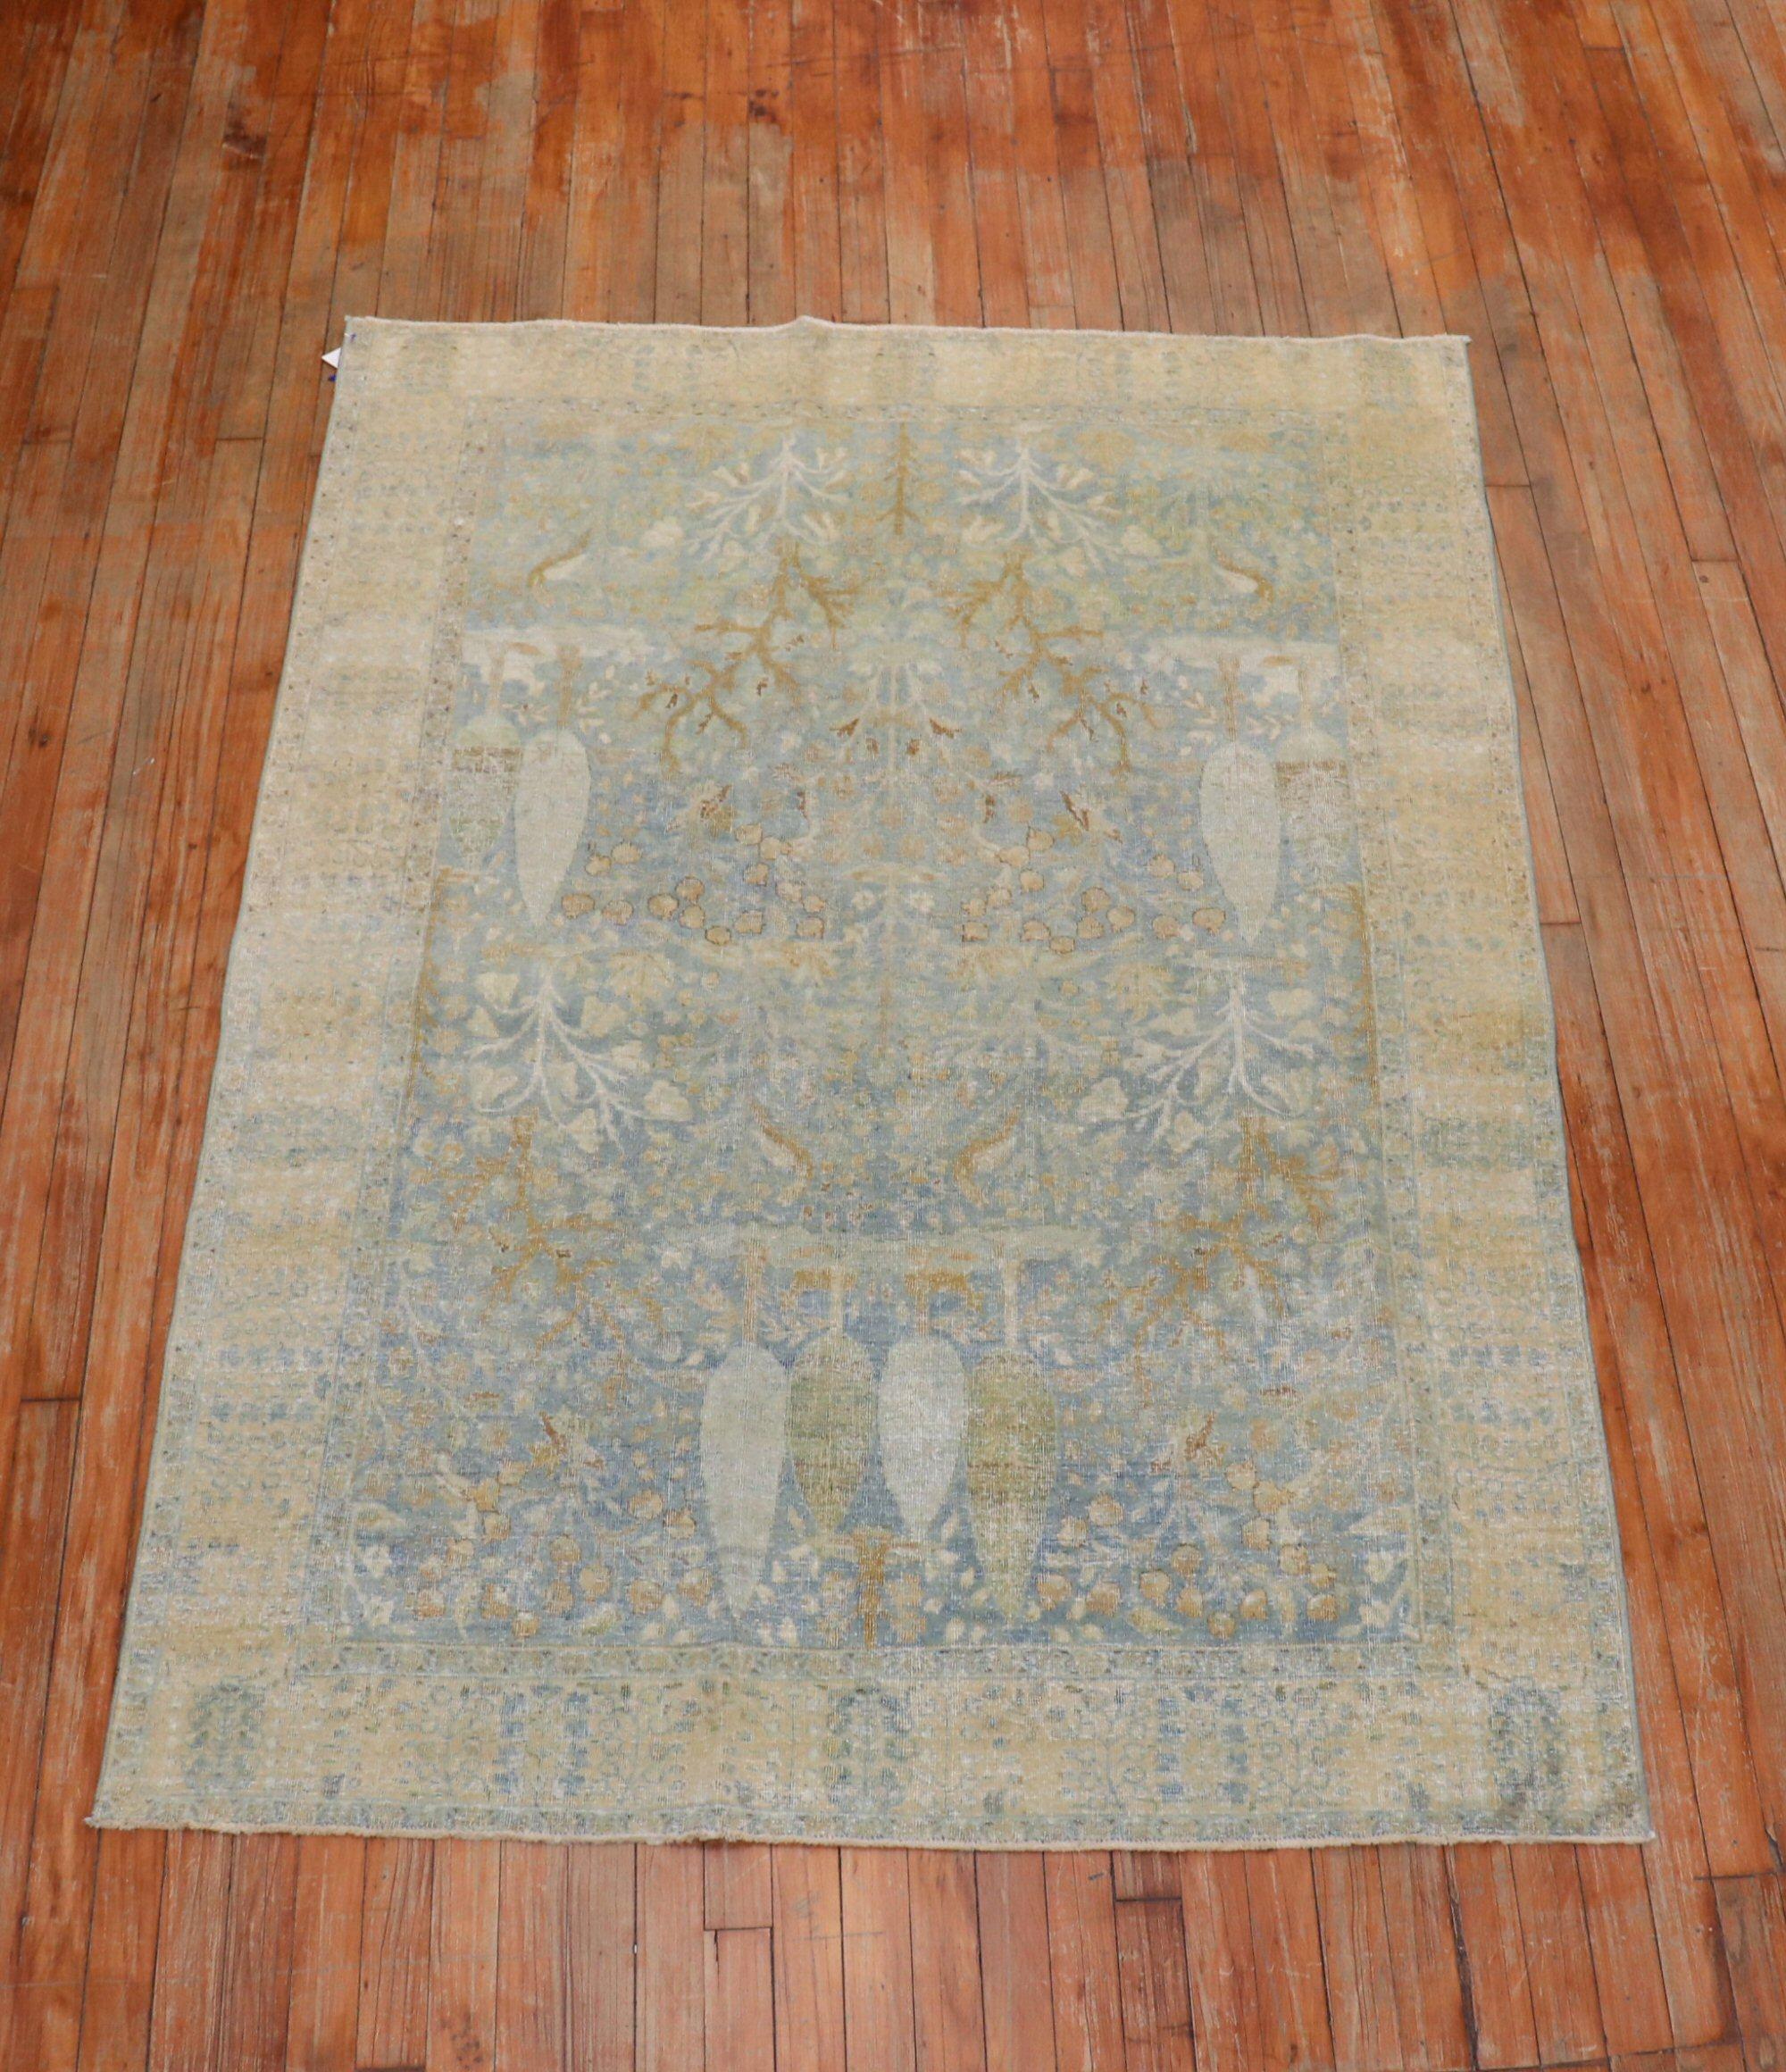 19th century Persian Tabriz Pictorial rug in predominant light blue. Light enough to use as a wall hanging as well

Measures: 4'6